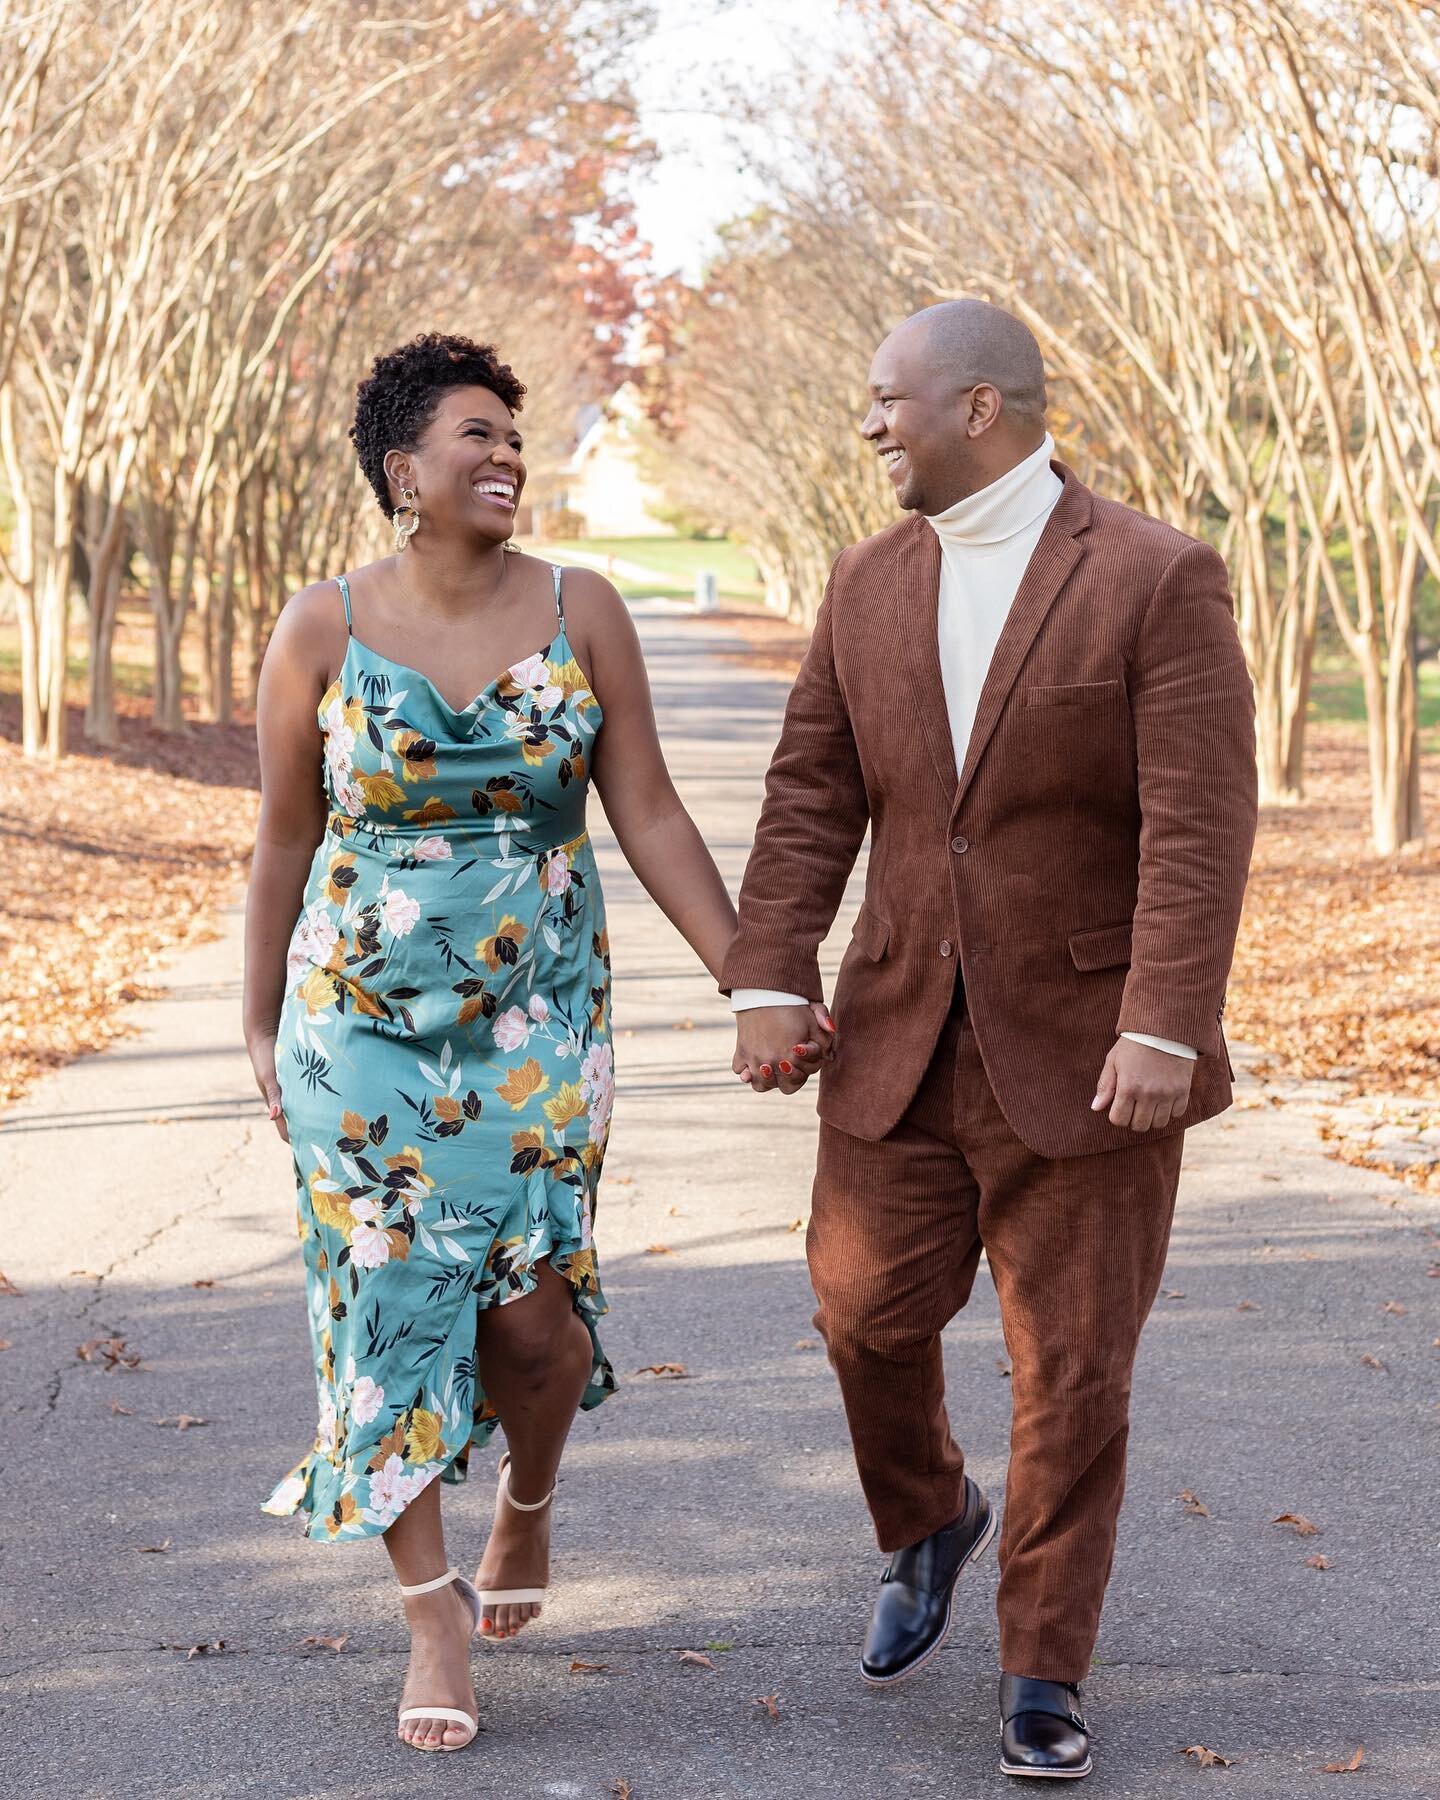 &ldquo;Love doesn&rsquo;t make the world go round. Love is what makes the ride worthwhile . &ldquo; ~ Franklin P. Jones~
&bull;
&bull;
&bull;
www.patricejolene.com
#patricejolenephoto #engagementphotos #engaged #liveinthemoment #mdphotographer #dcpho